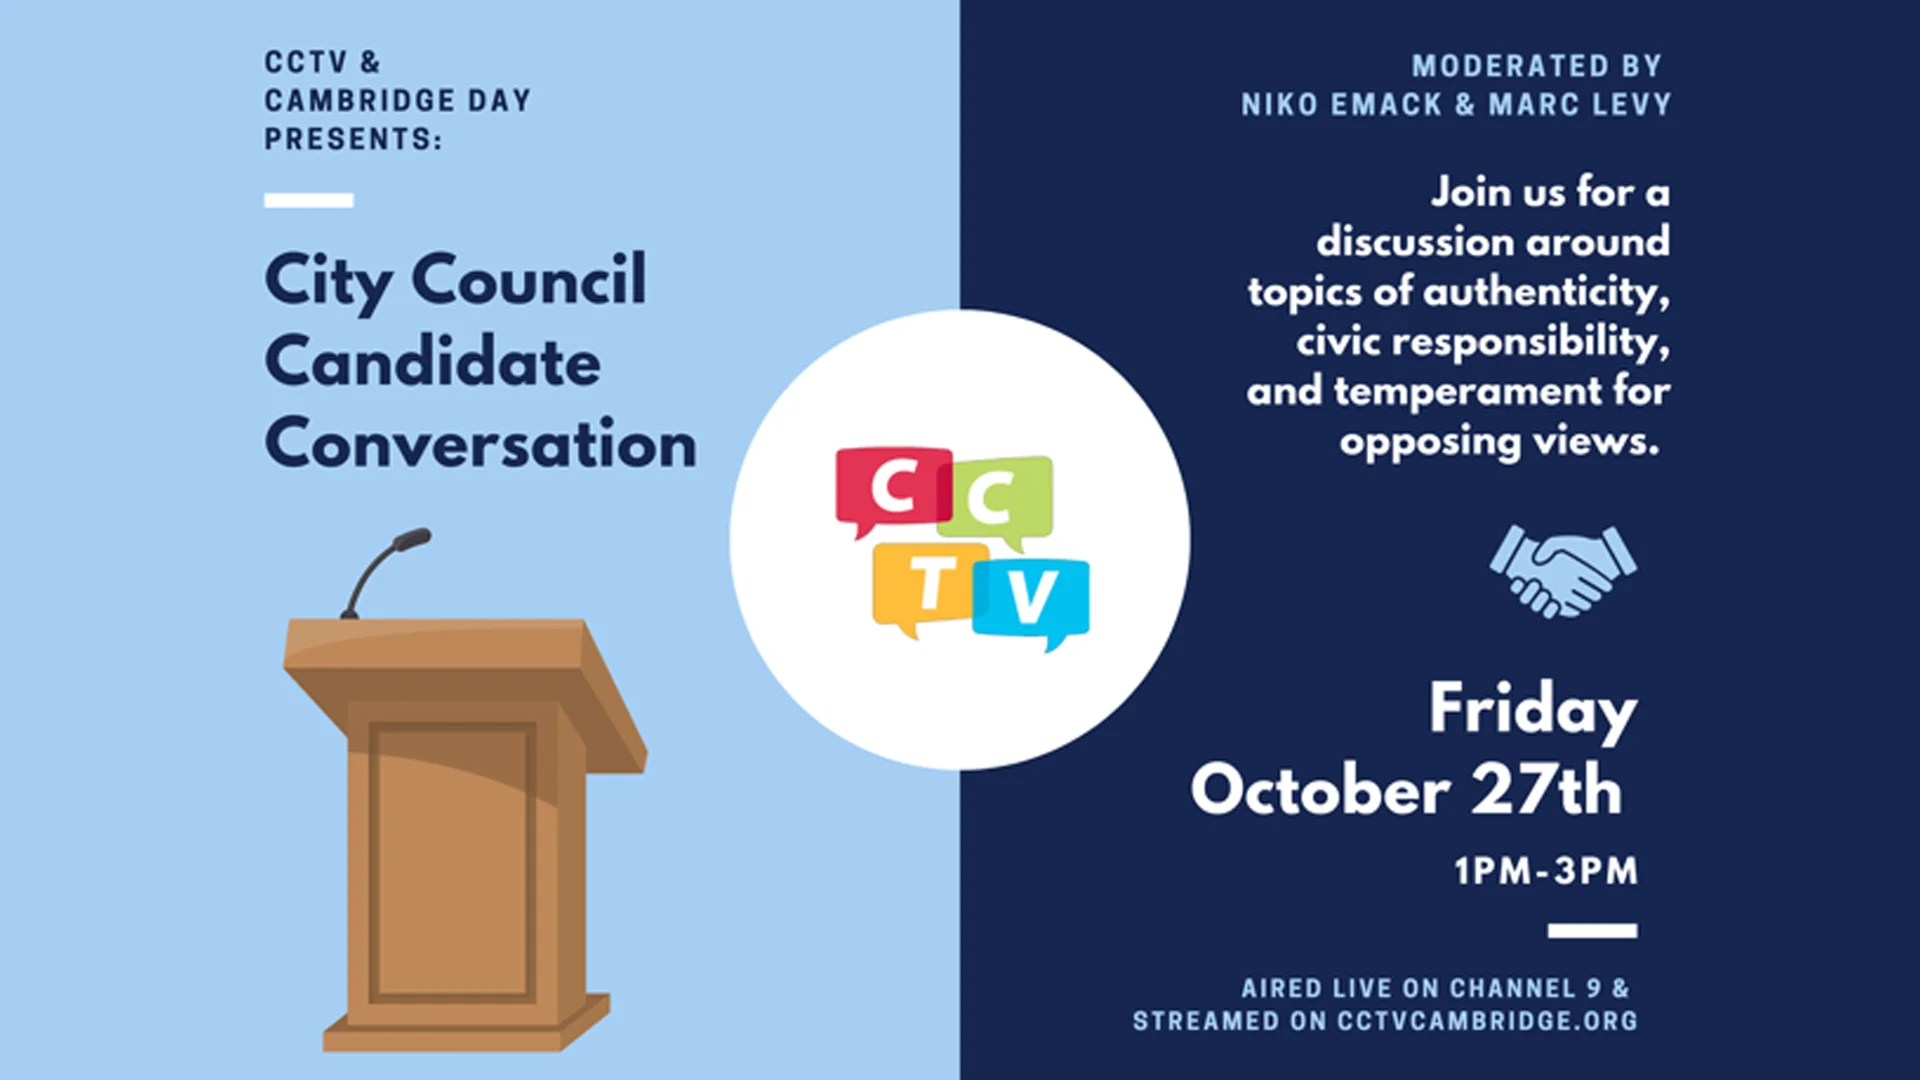 City Council Candidate Conversation presented by Cambridge Day and